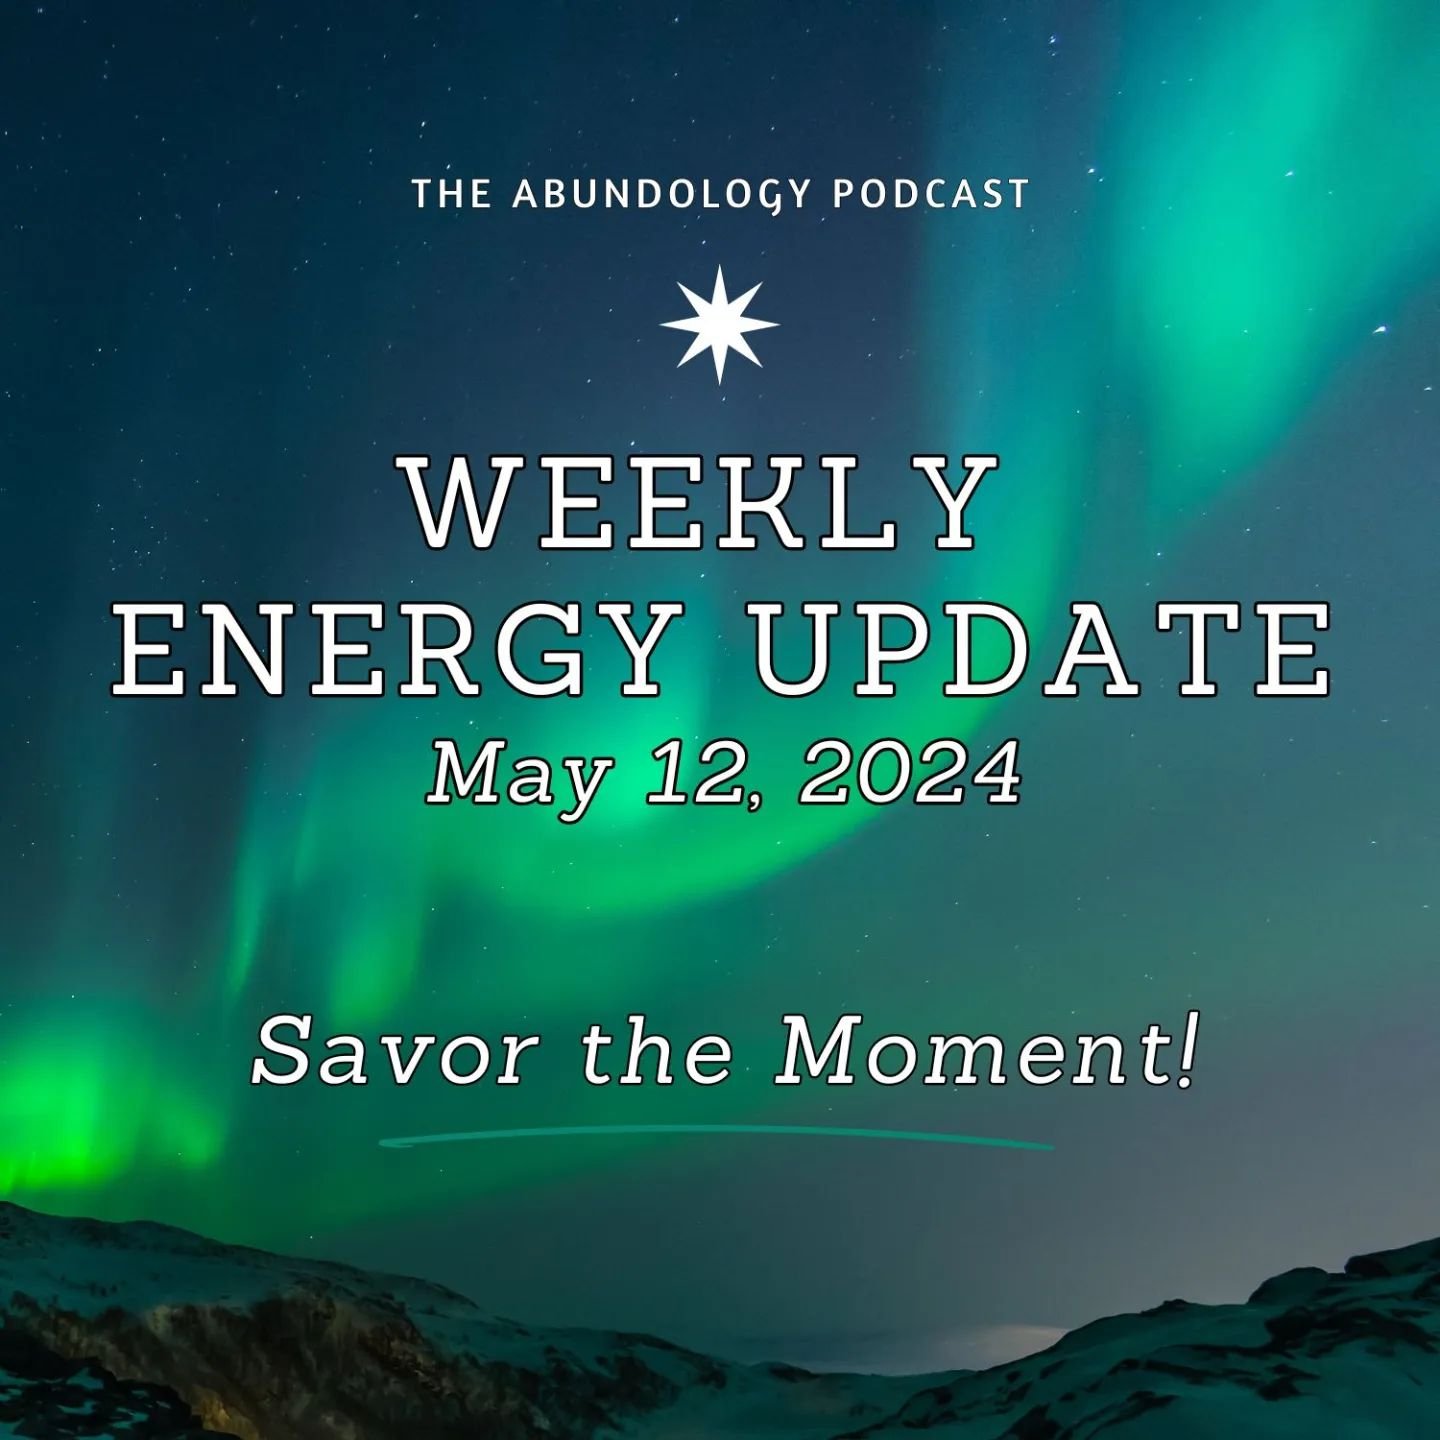 The Weekly Energy Update Podcast is Up!&nbsp;🌞

This is the last week of Taurus Season. The energy changes in a week when we move from sweet, slow, and steady Taurus season to busy Gemini Season. Gemini season brings excitement and newness. Taurus s